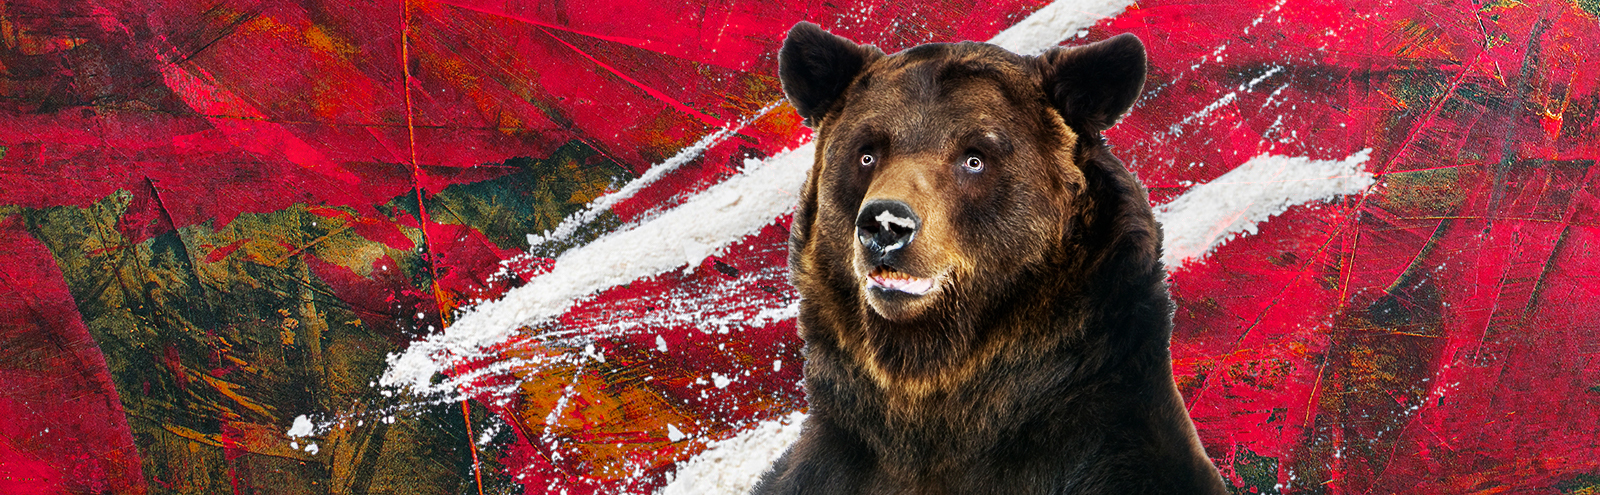 The True Story Of The 'Cocaine Bear' Movie Is More Wild Than The Title